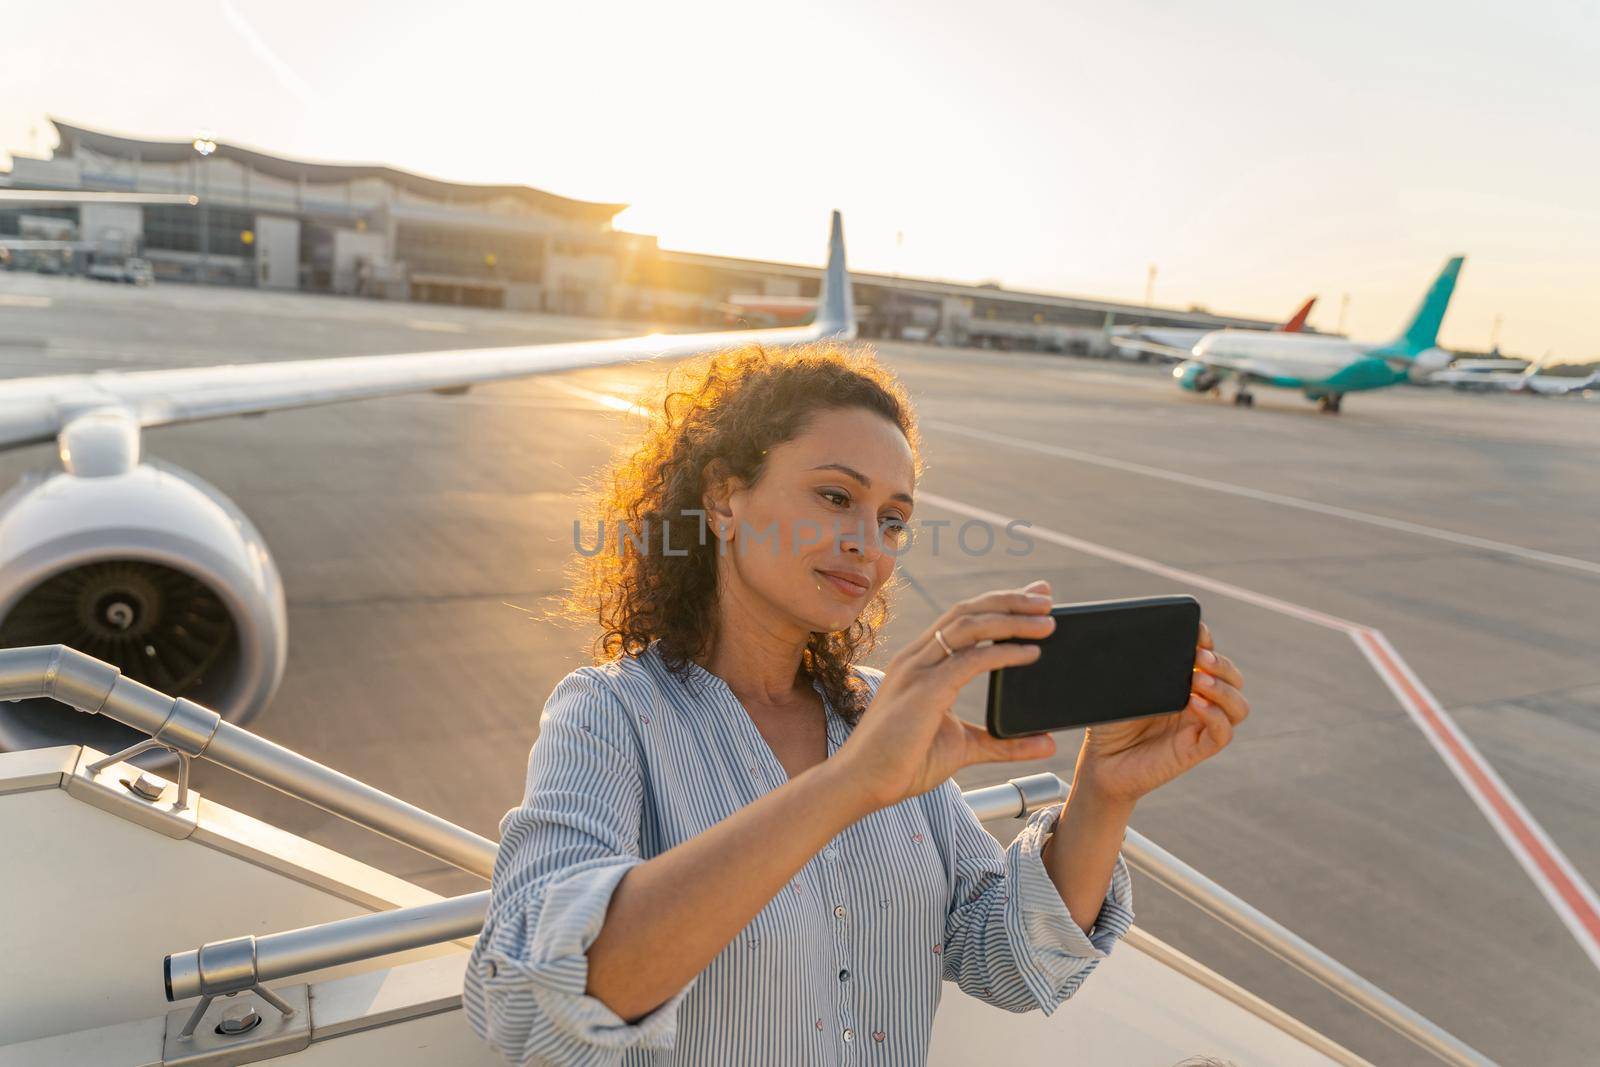 Smiling pretty lady enjoying her trip while making photo on her smartphone near plane. Travel concept